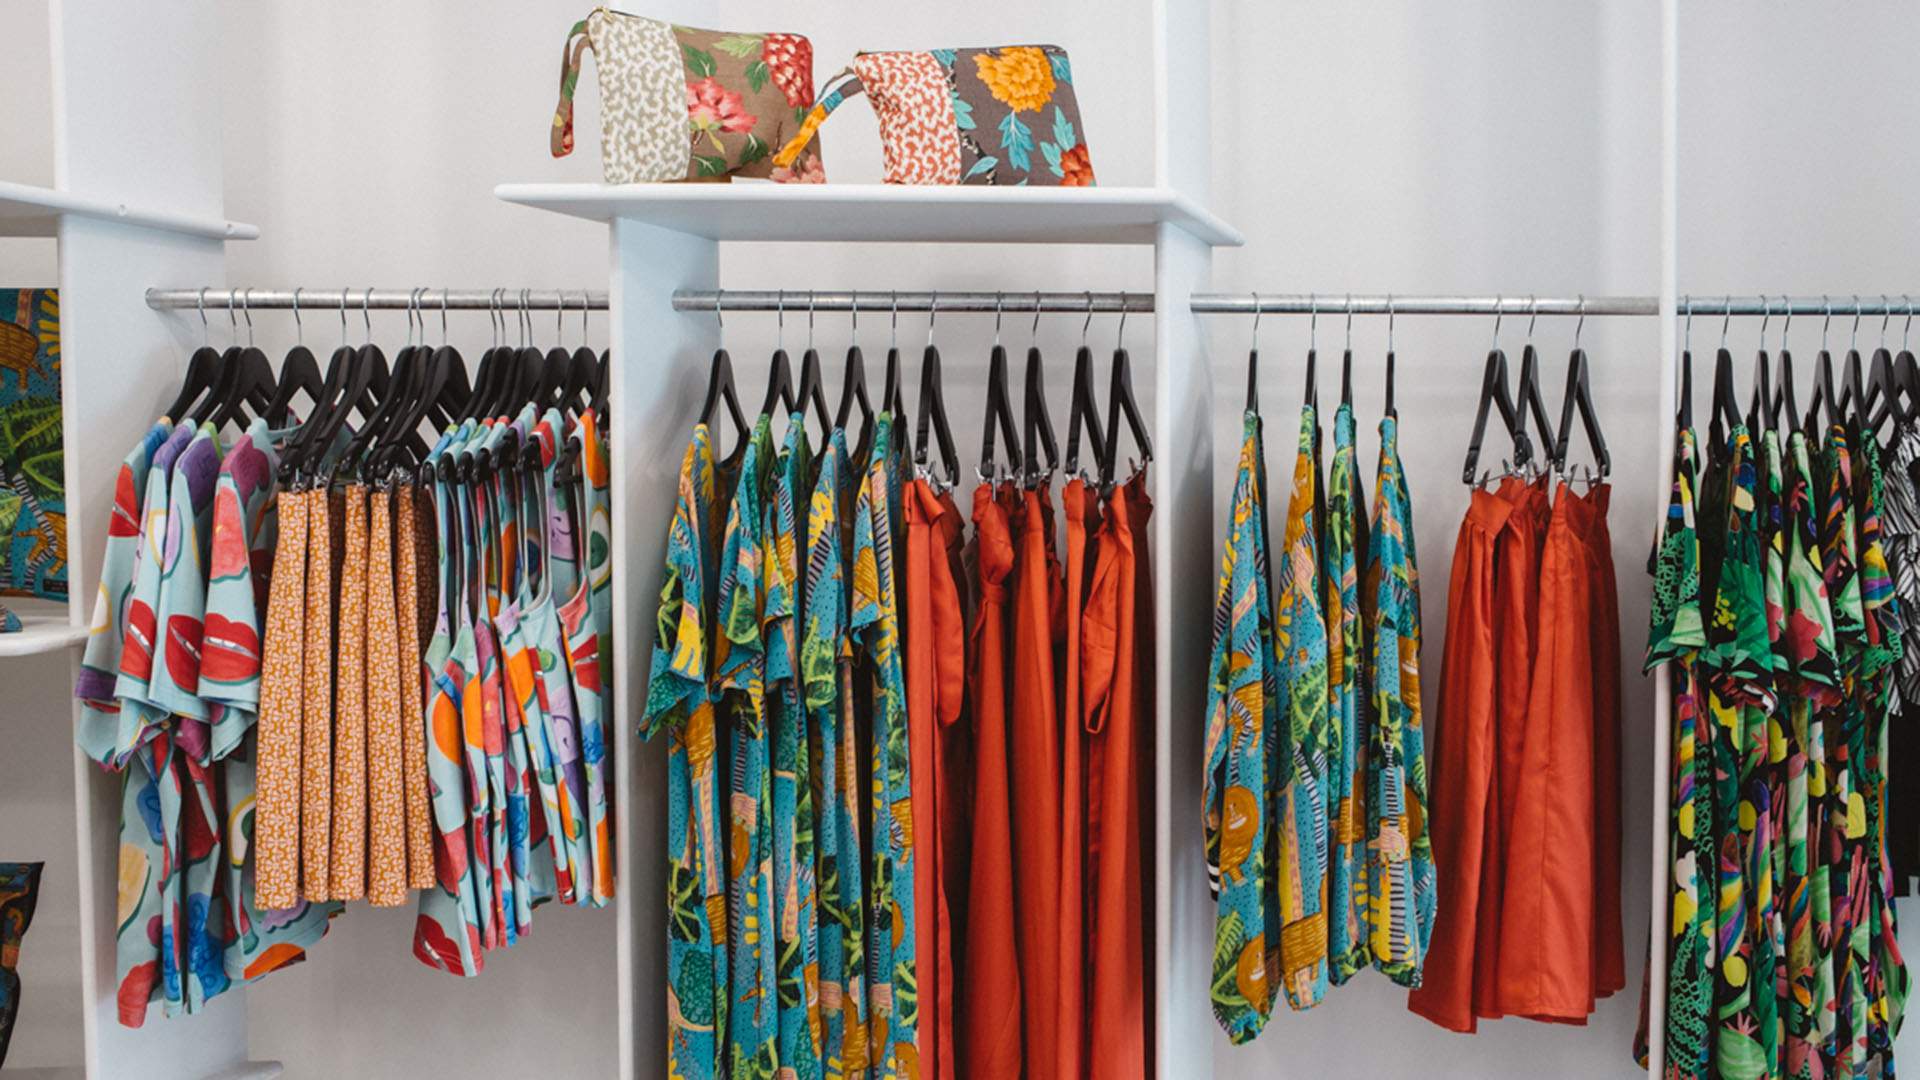 Newtown-Based Fashion Label The Social Outfit Has Opened a Big New Retail Space on King Street